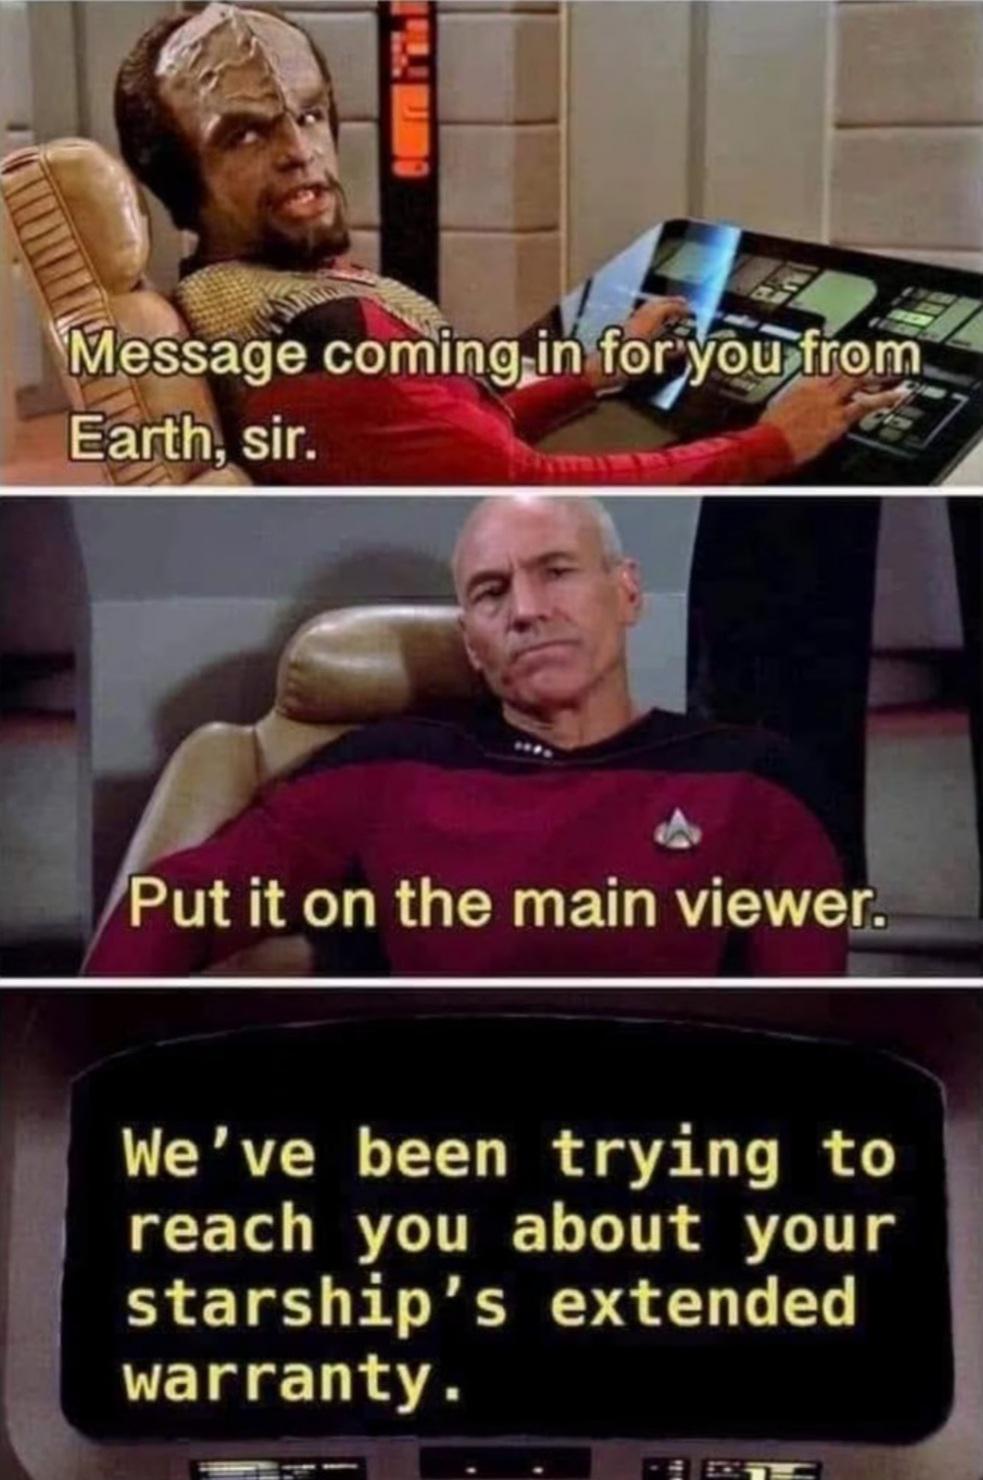 funny memes - dank memes - funny star trek memes - Message coming in for you from Earth, sir. 9 Put it on the main viewer. We've been trying to reach you about your starship's extended warranty.